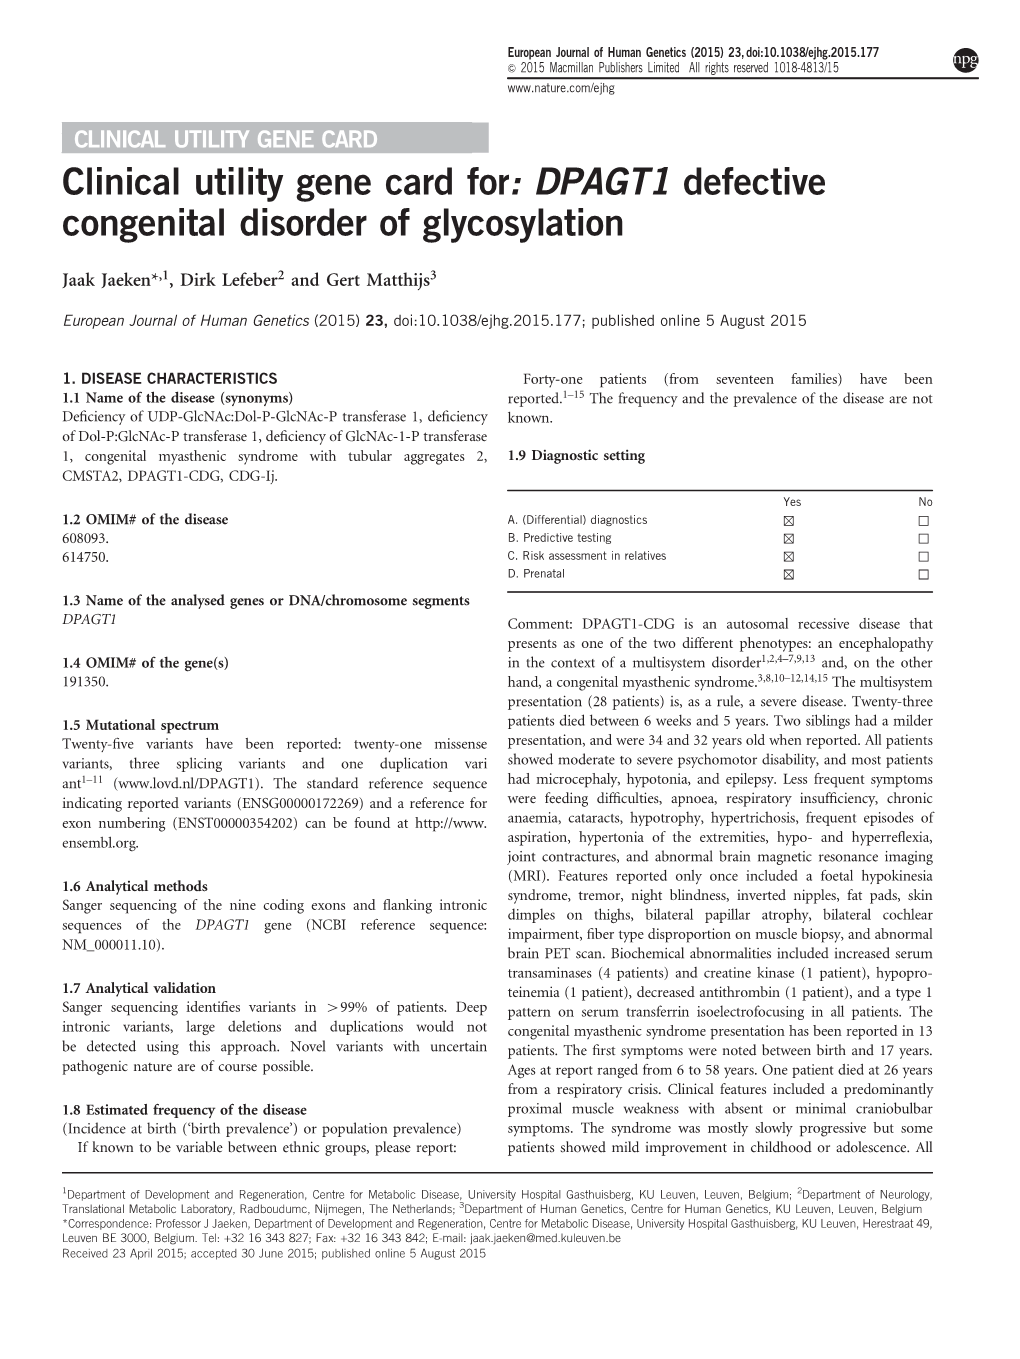 Clinical Utility Gene Card For: DPAGT1 Defective Congenital Disorder of Glycosylation